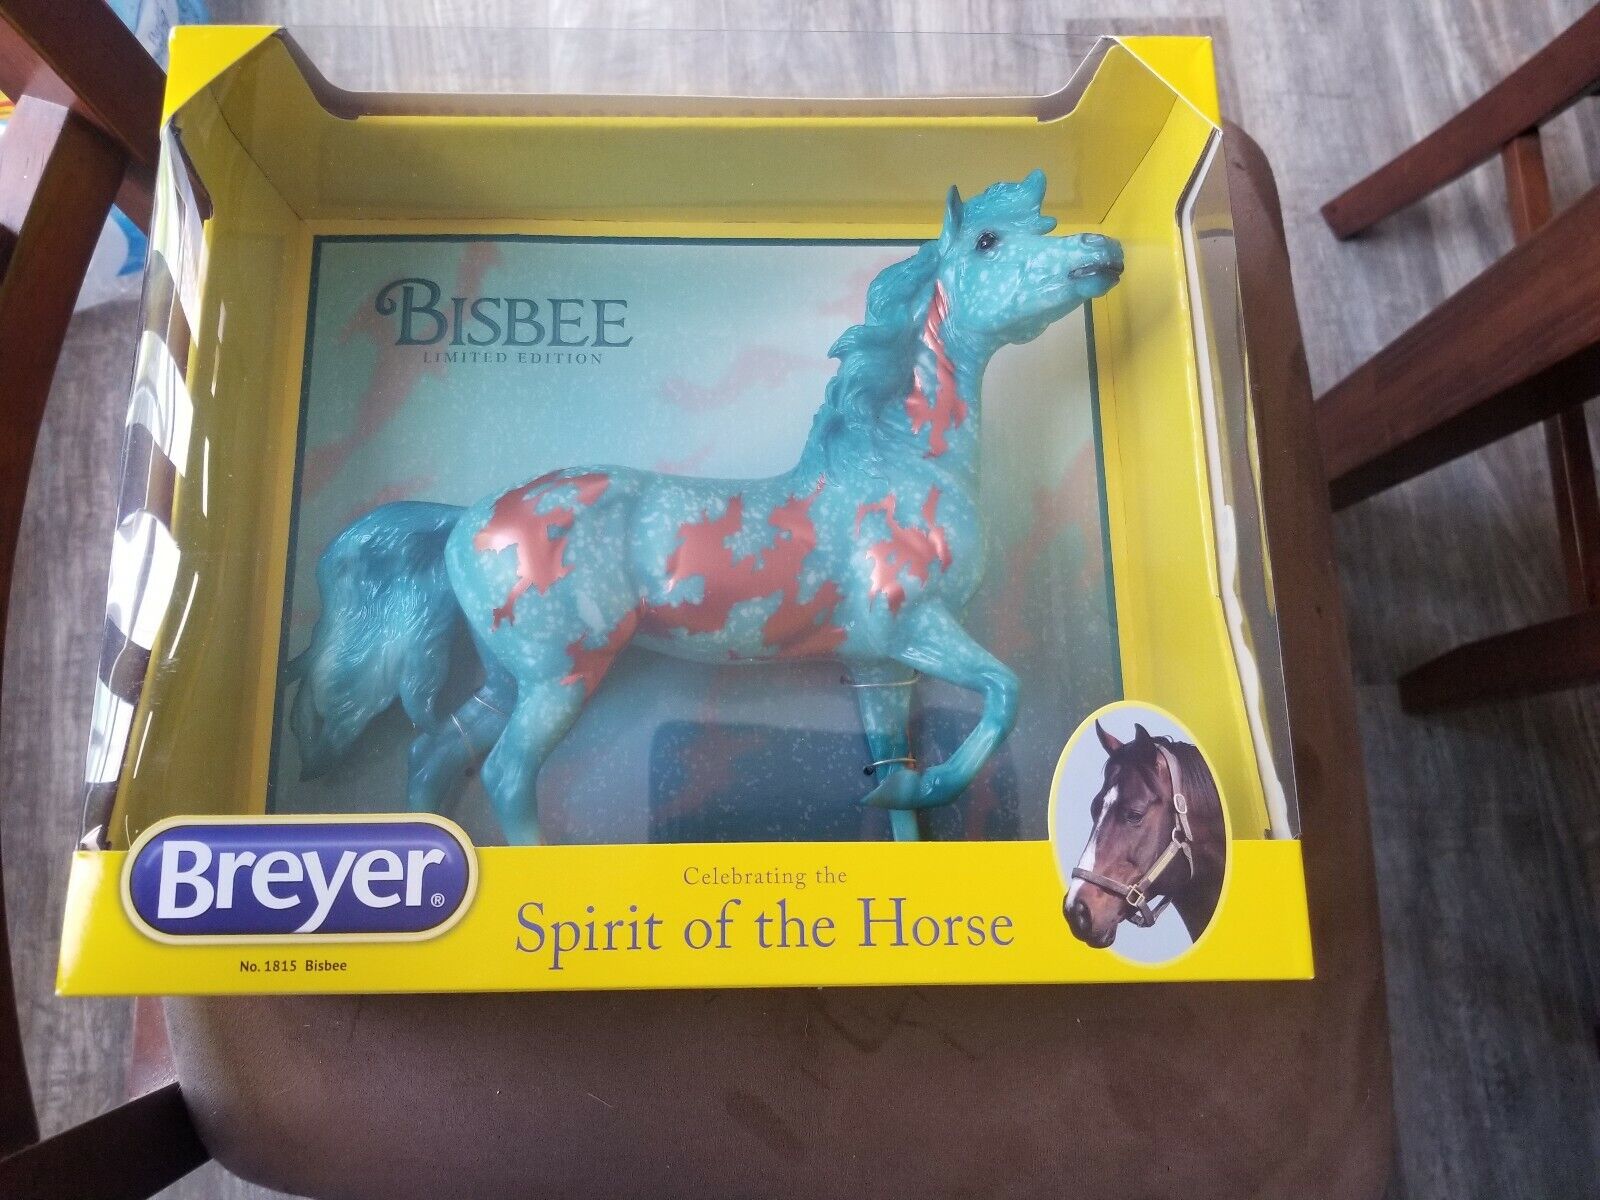 BREYER Bisbee #1815 Limited Edition Special Run turquoise mustang hwin mold